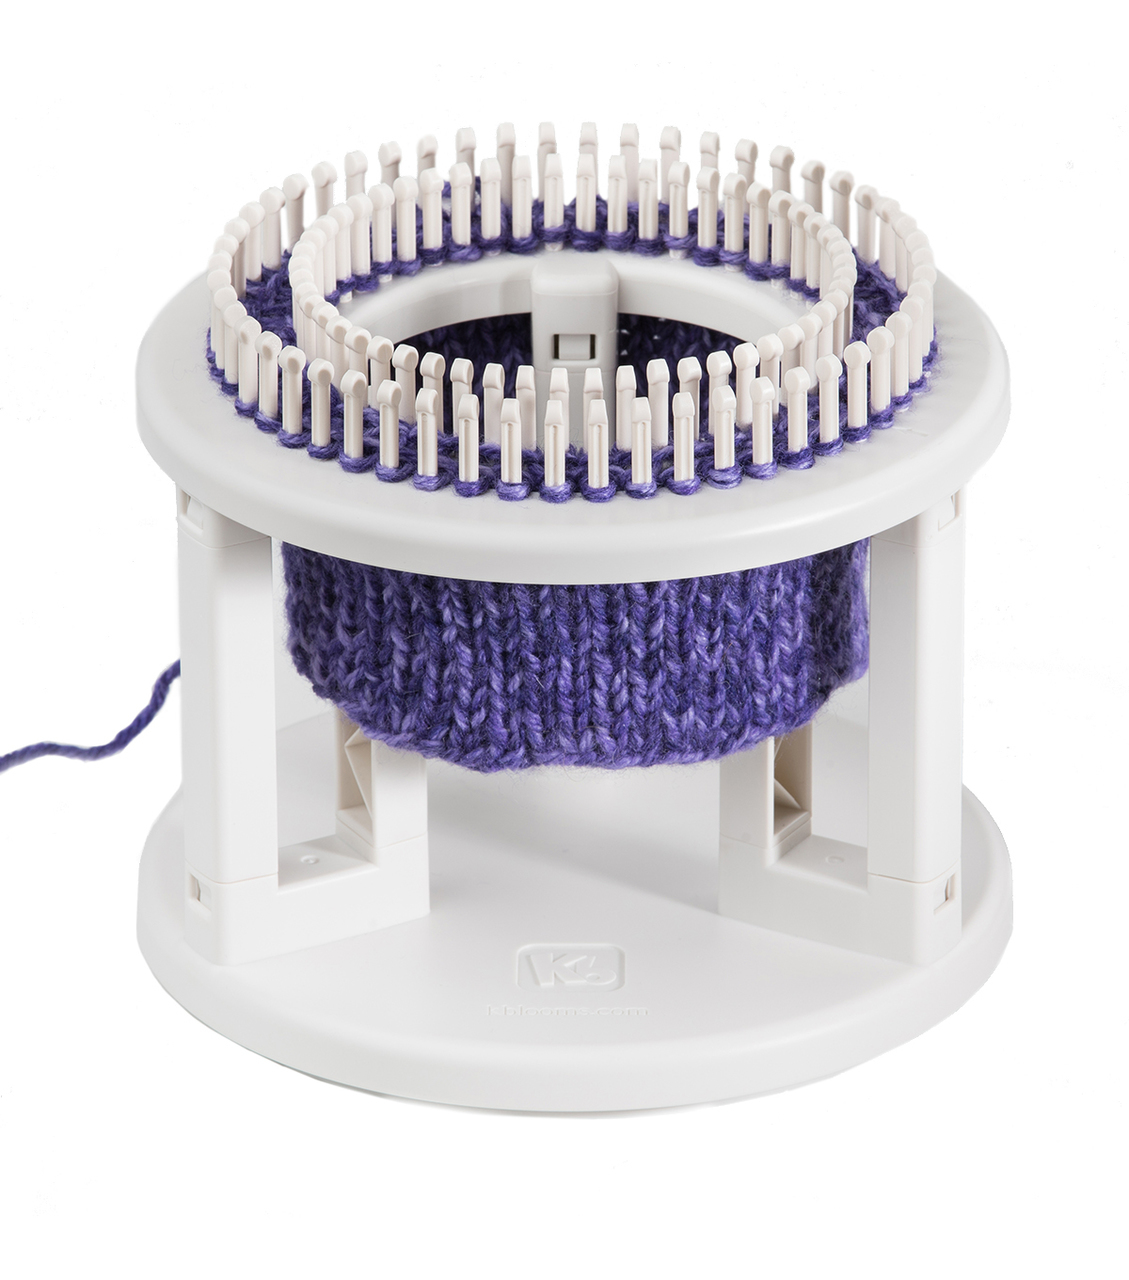 KB Looms - Rotating Double Knit Loom